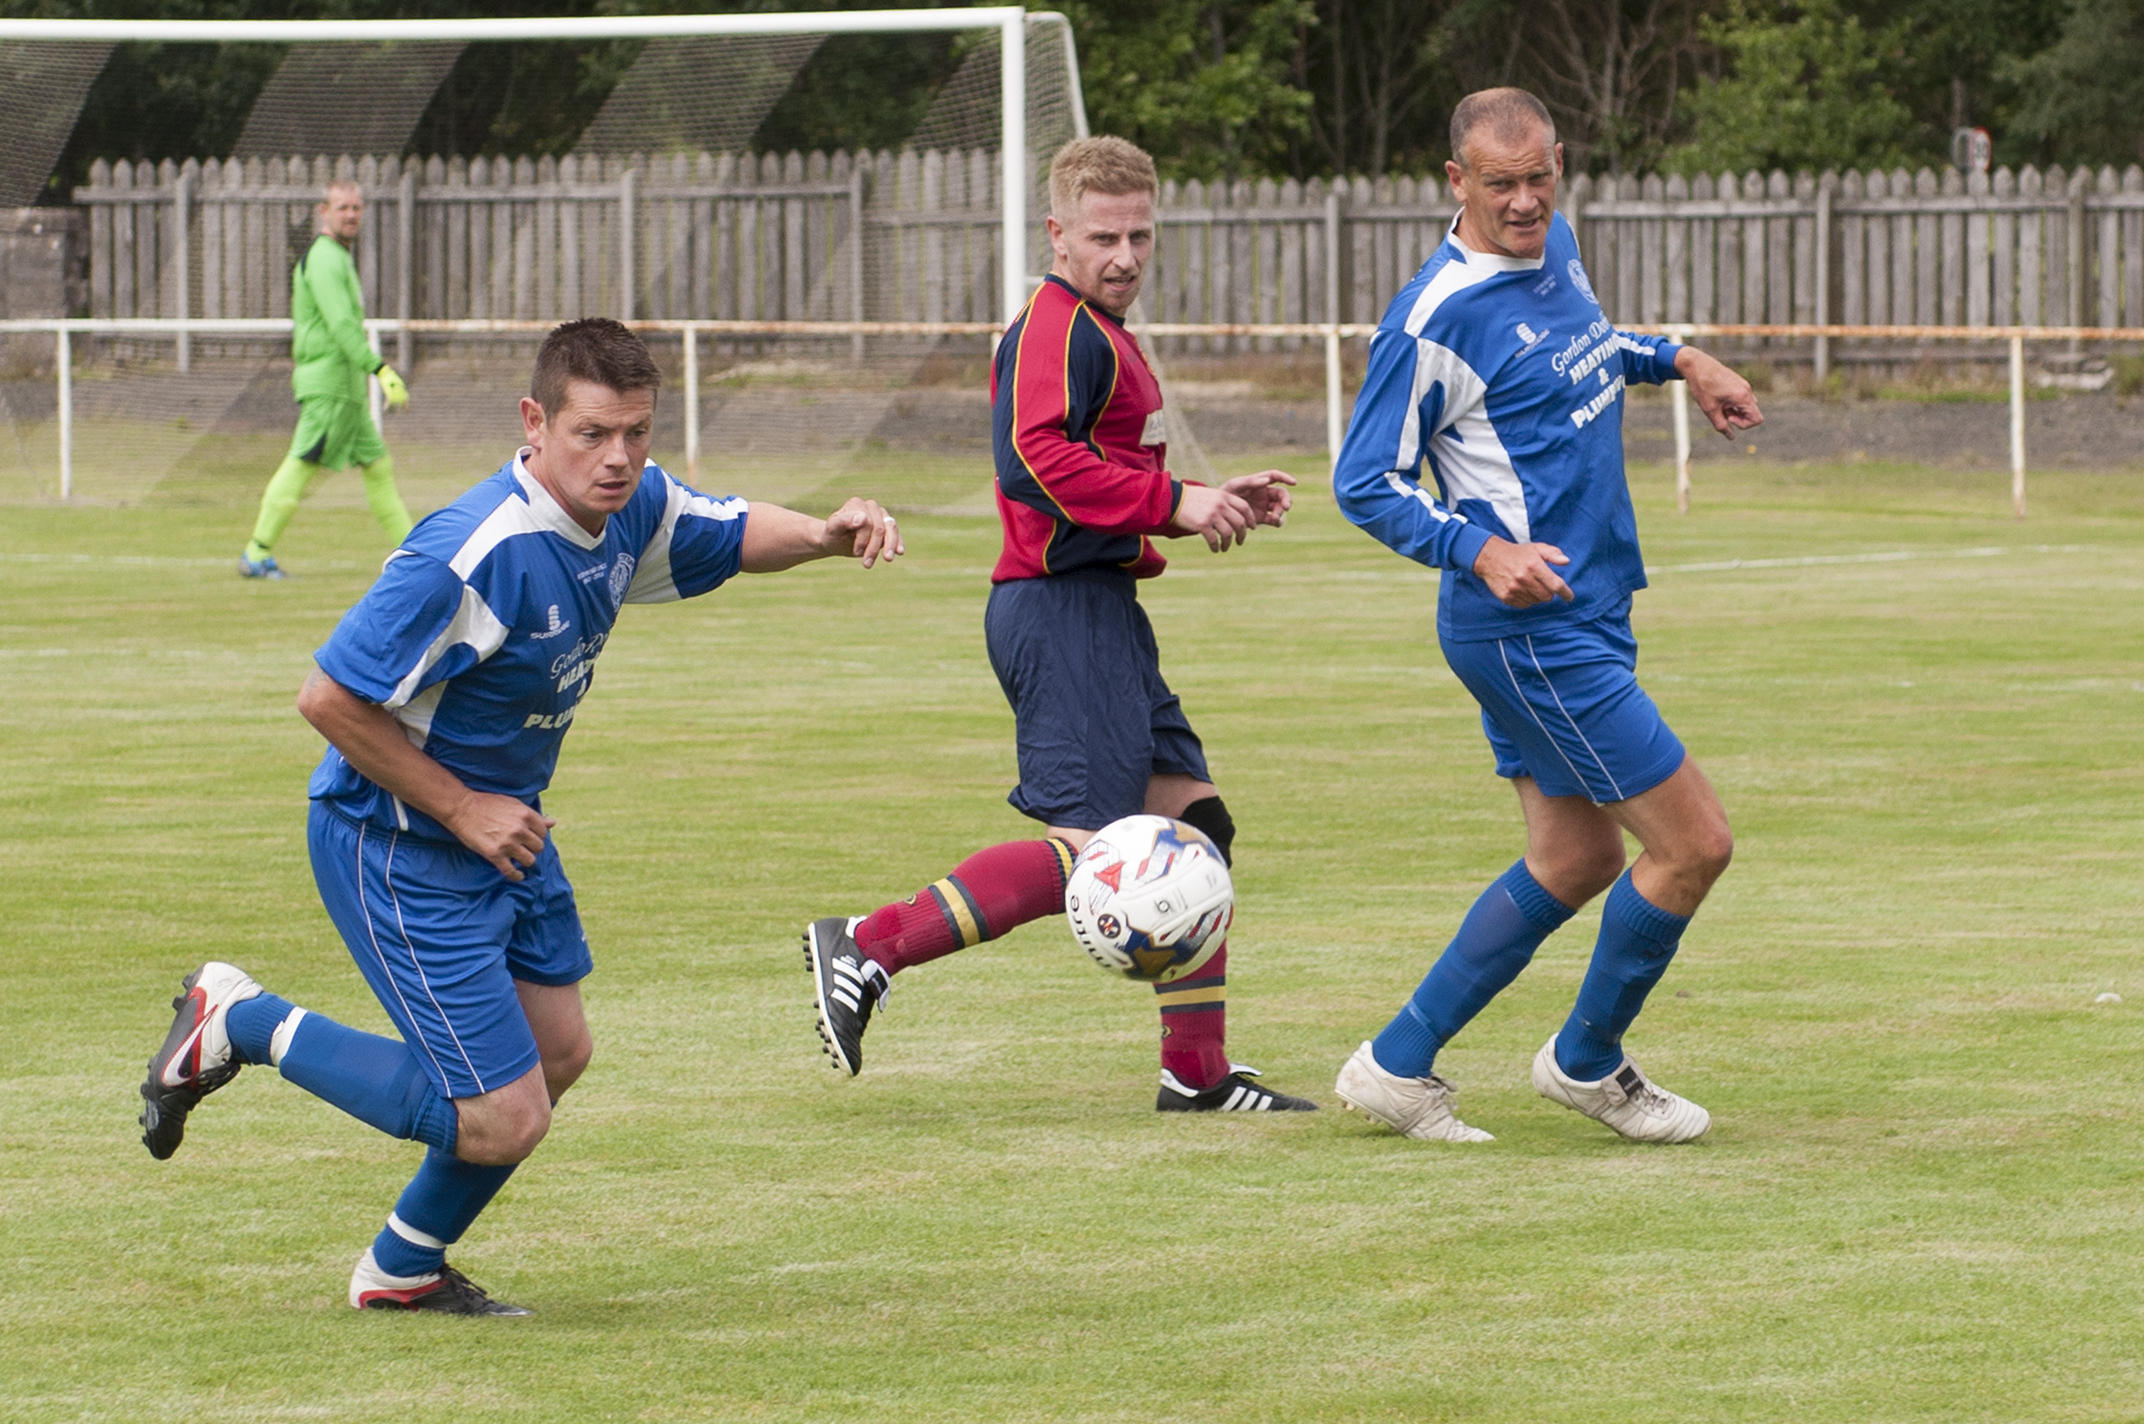 The Kirrie Legends match marked the occasion